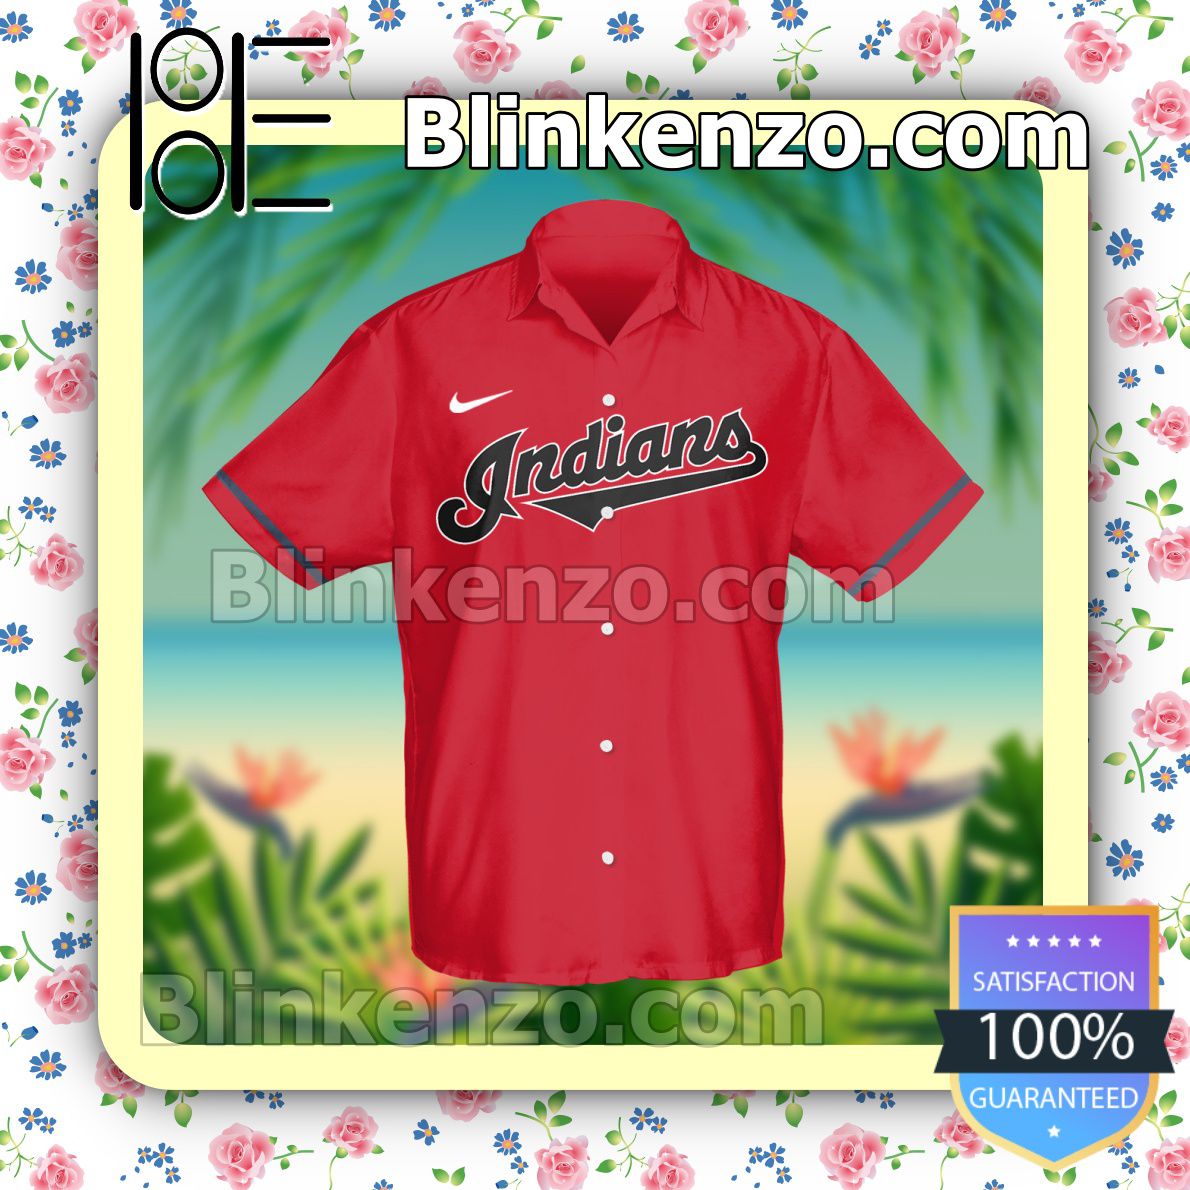 Cleveland Indians MLB Flower Hawaiian Shirt Unique Gift For Fans -  Freedomdesign